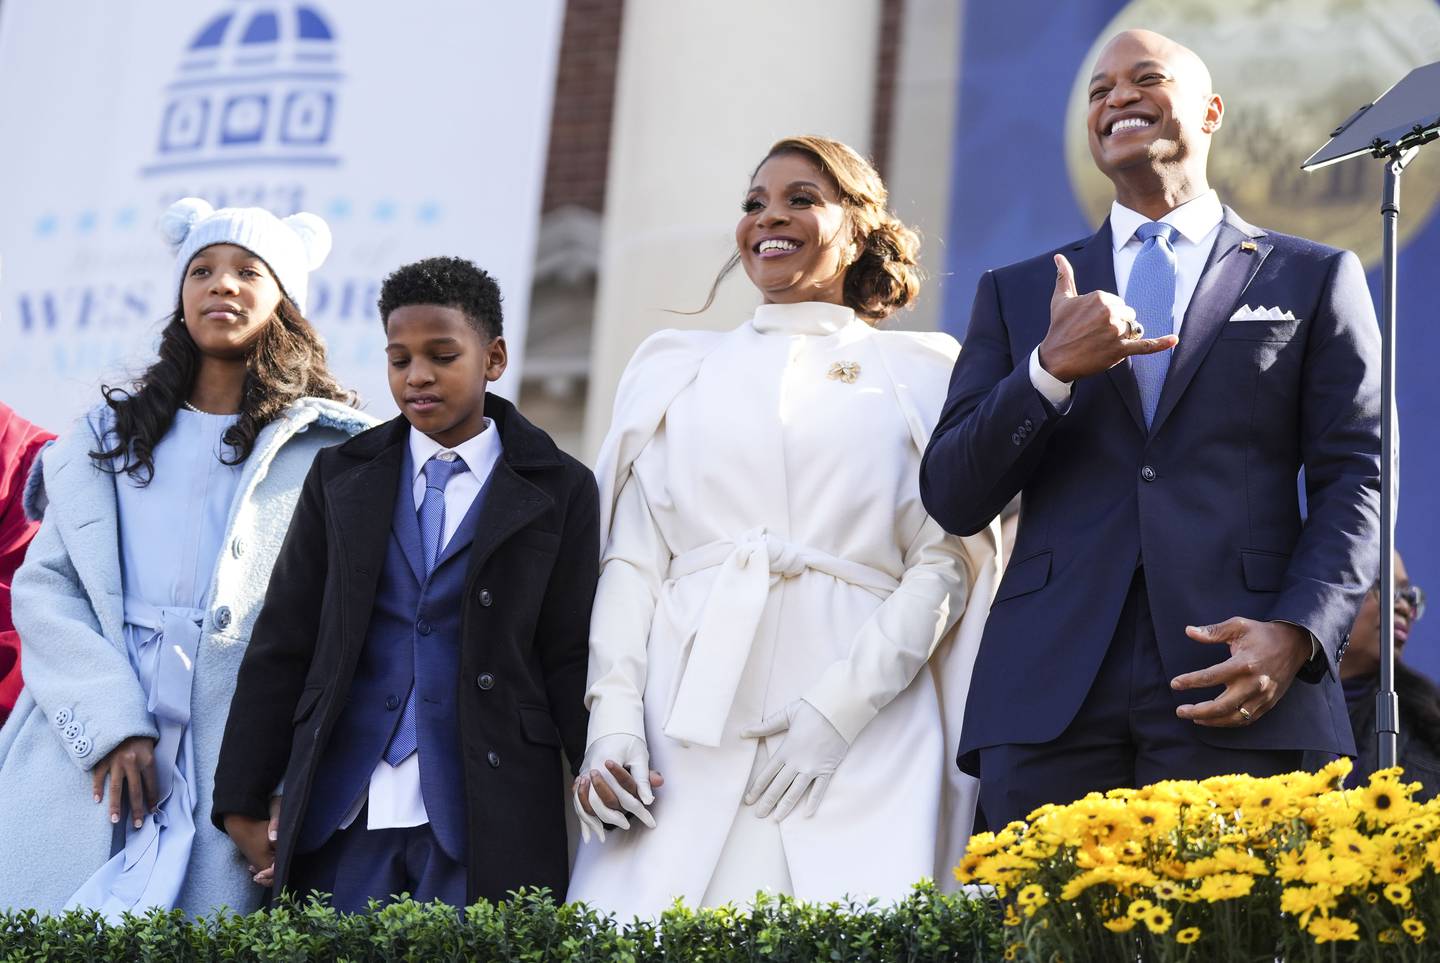 Mia, James, Dawn and Gov. Wes Moore during inauguration festivities in Annapolis on Wednesday. Still on the Moores' to-do list: Adopting a dog for the children. (Jessica Gallagher/The Baltimore Banner)